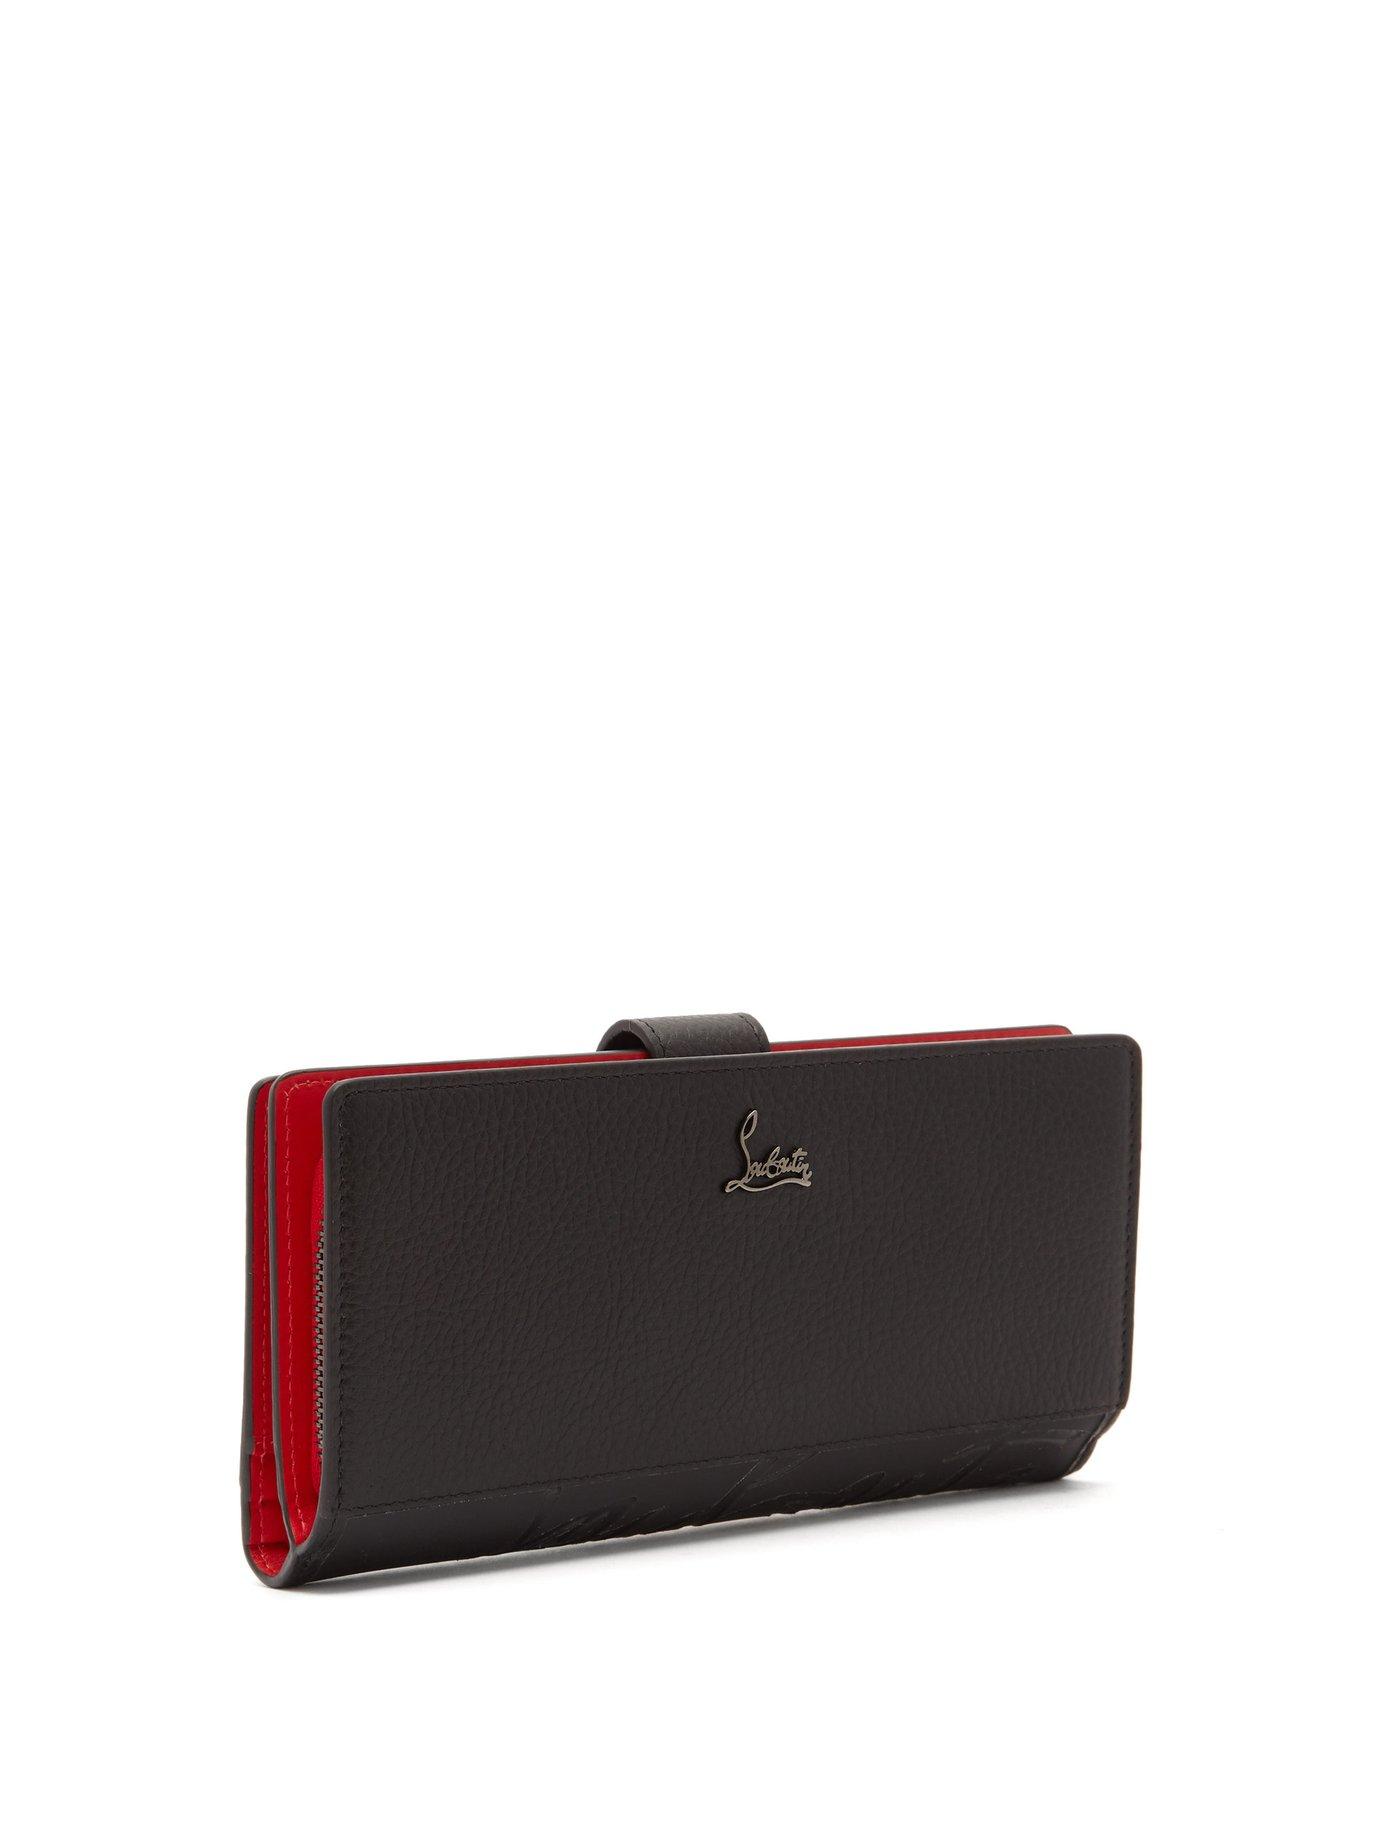 Christian Louboutin Paloma Continental Leather Wallet in Black 